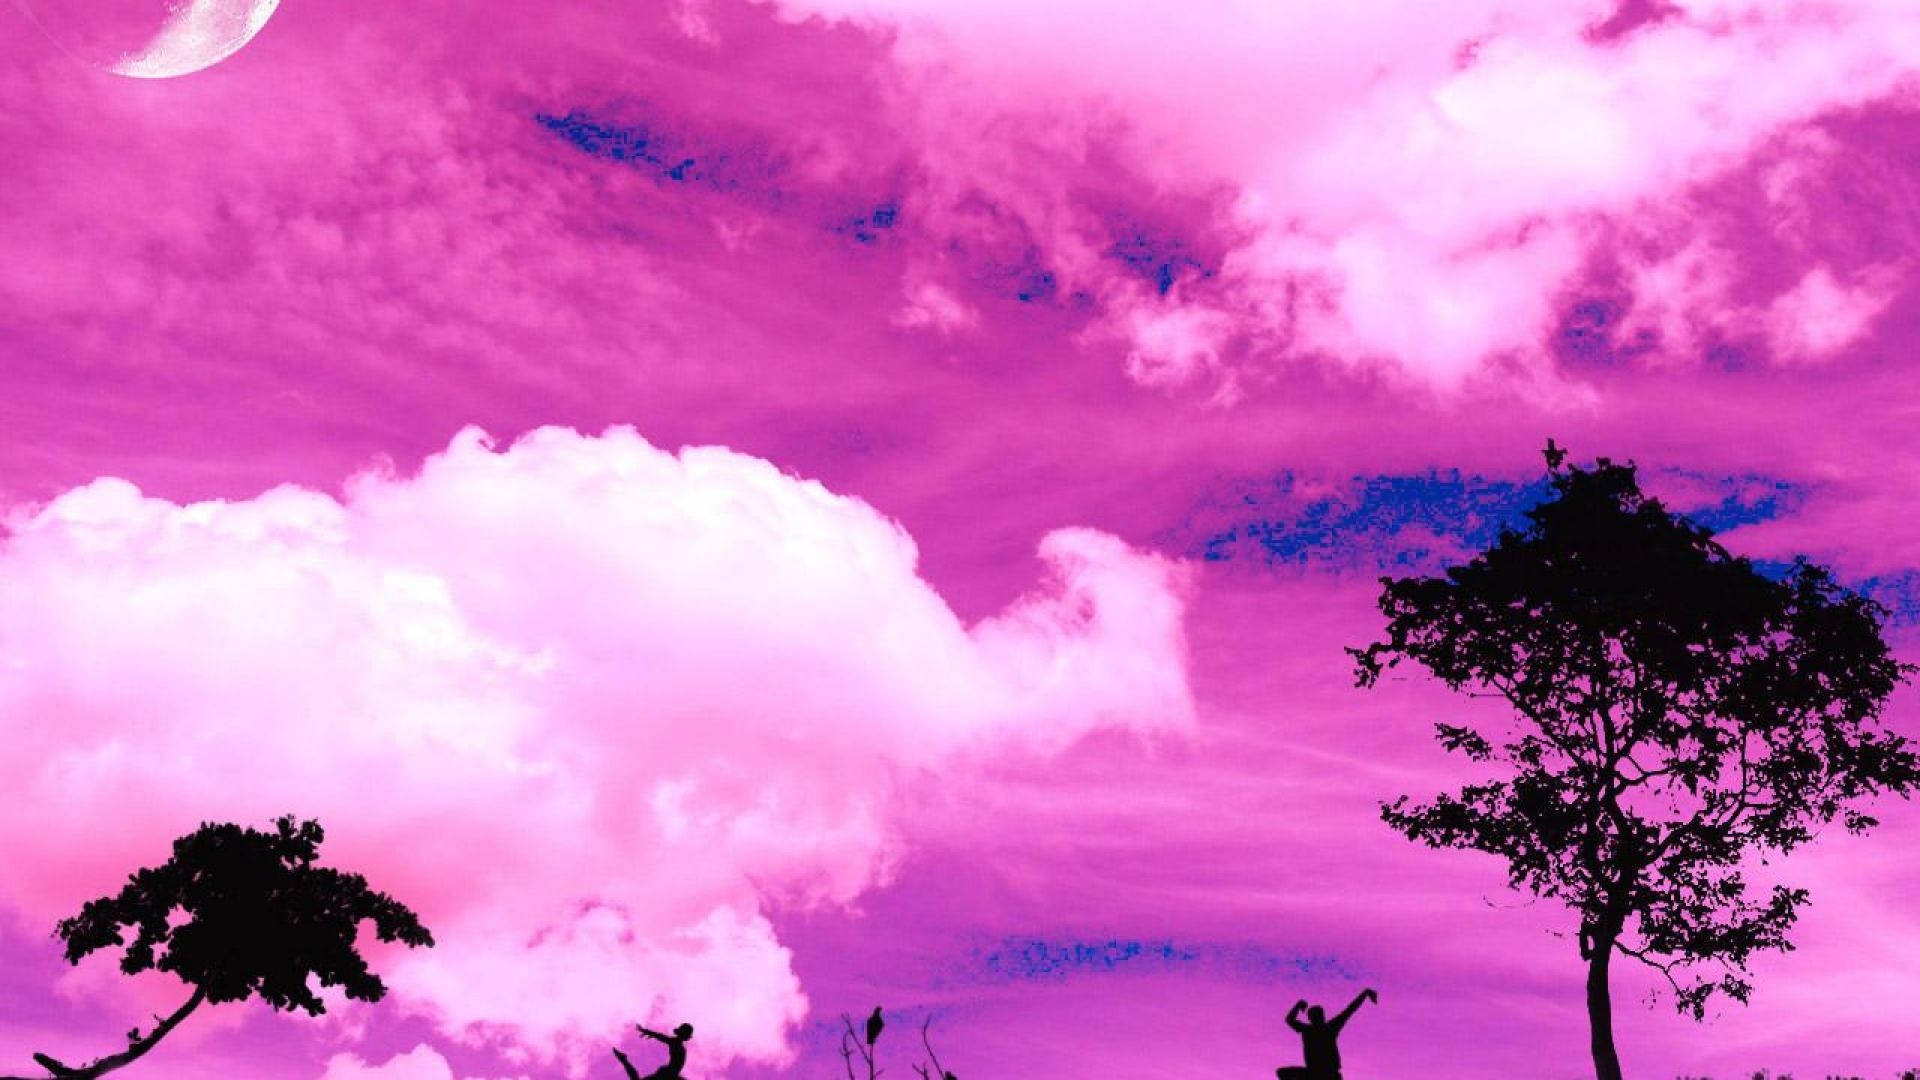 Pink Aesthetic Tumblr Laptop With Sky Background